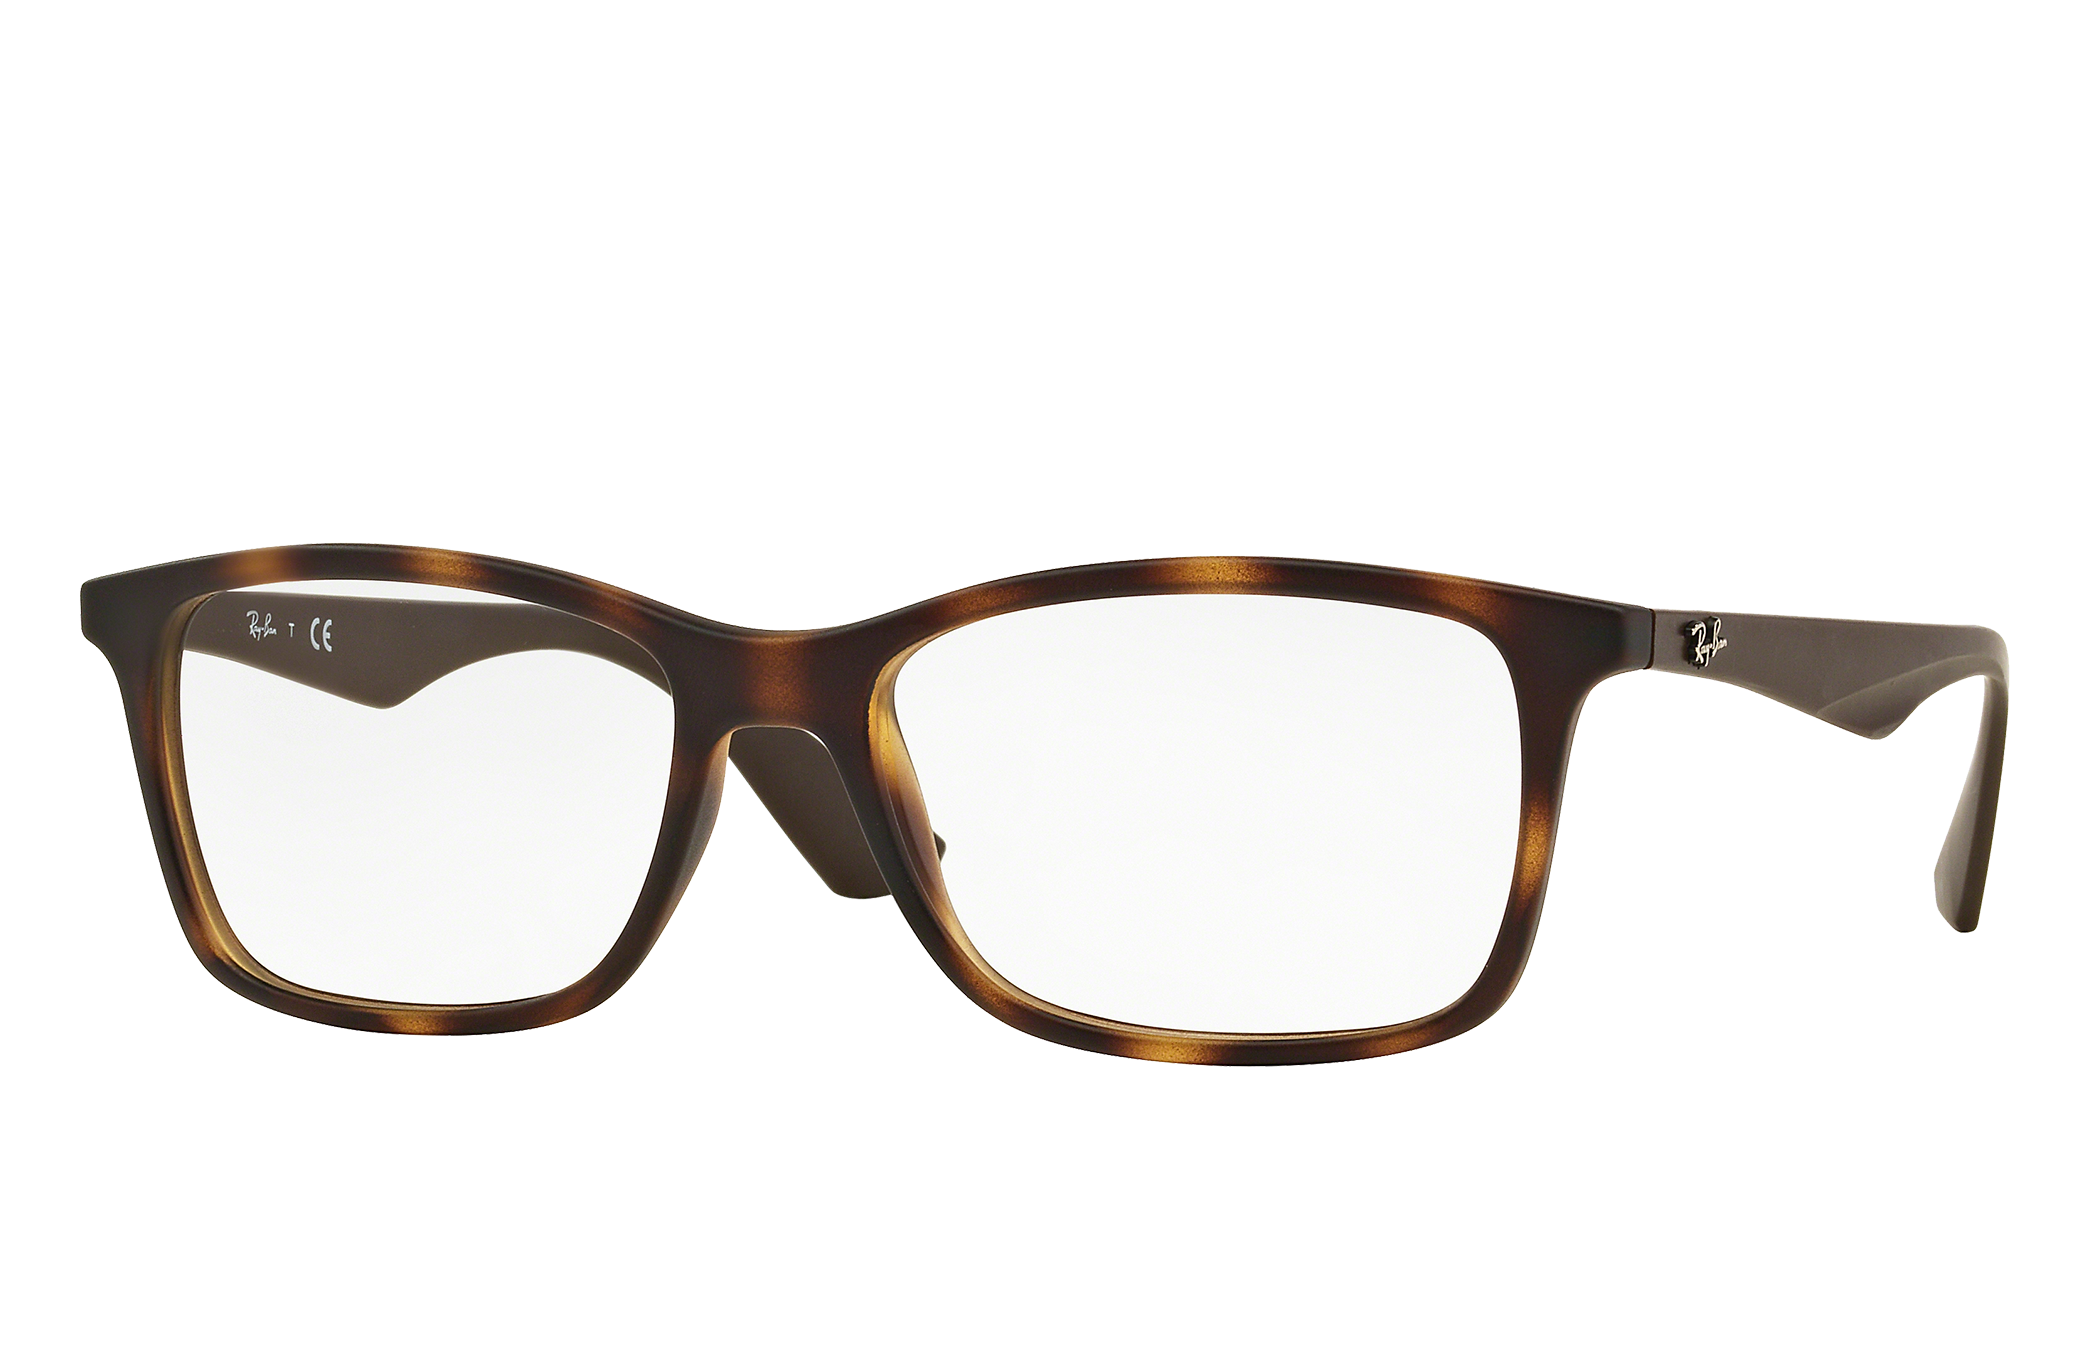 Rb7047f Eyeglasses with Tortoise Frame - RB7047F | Ray-Ban®